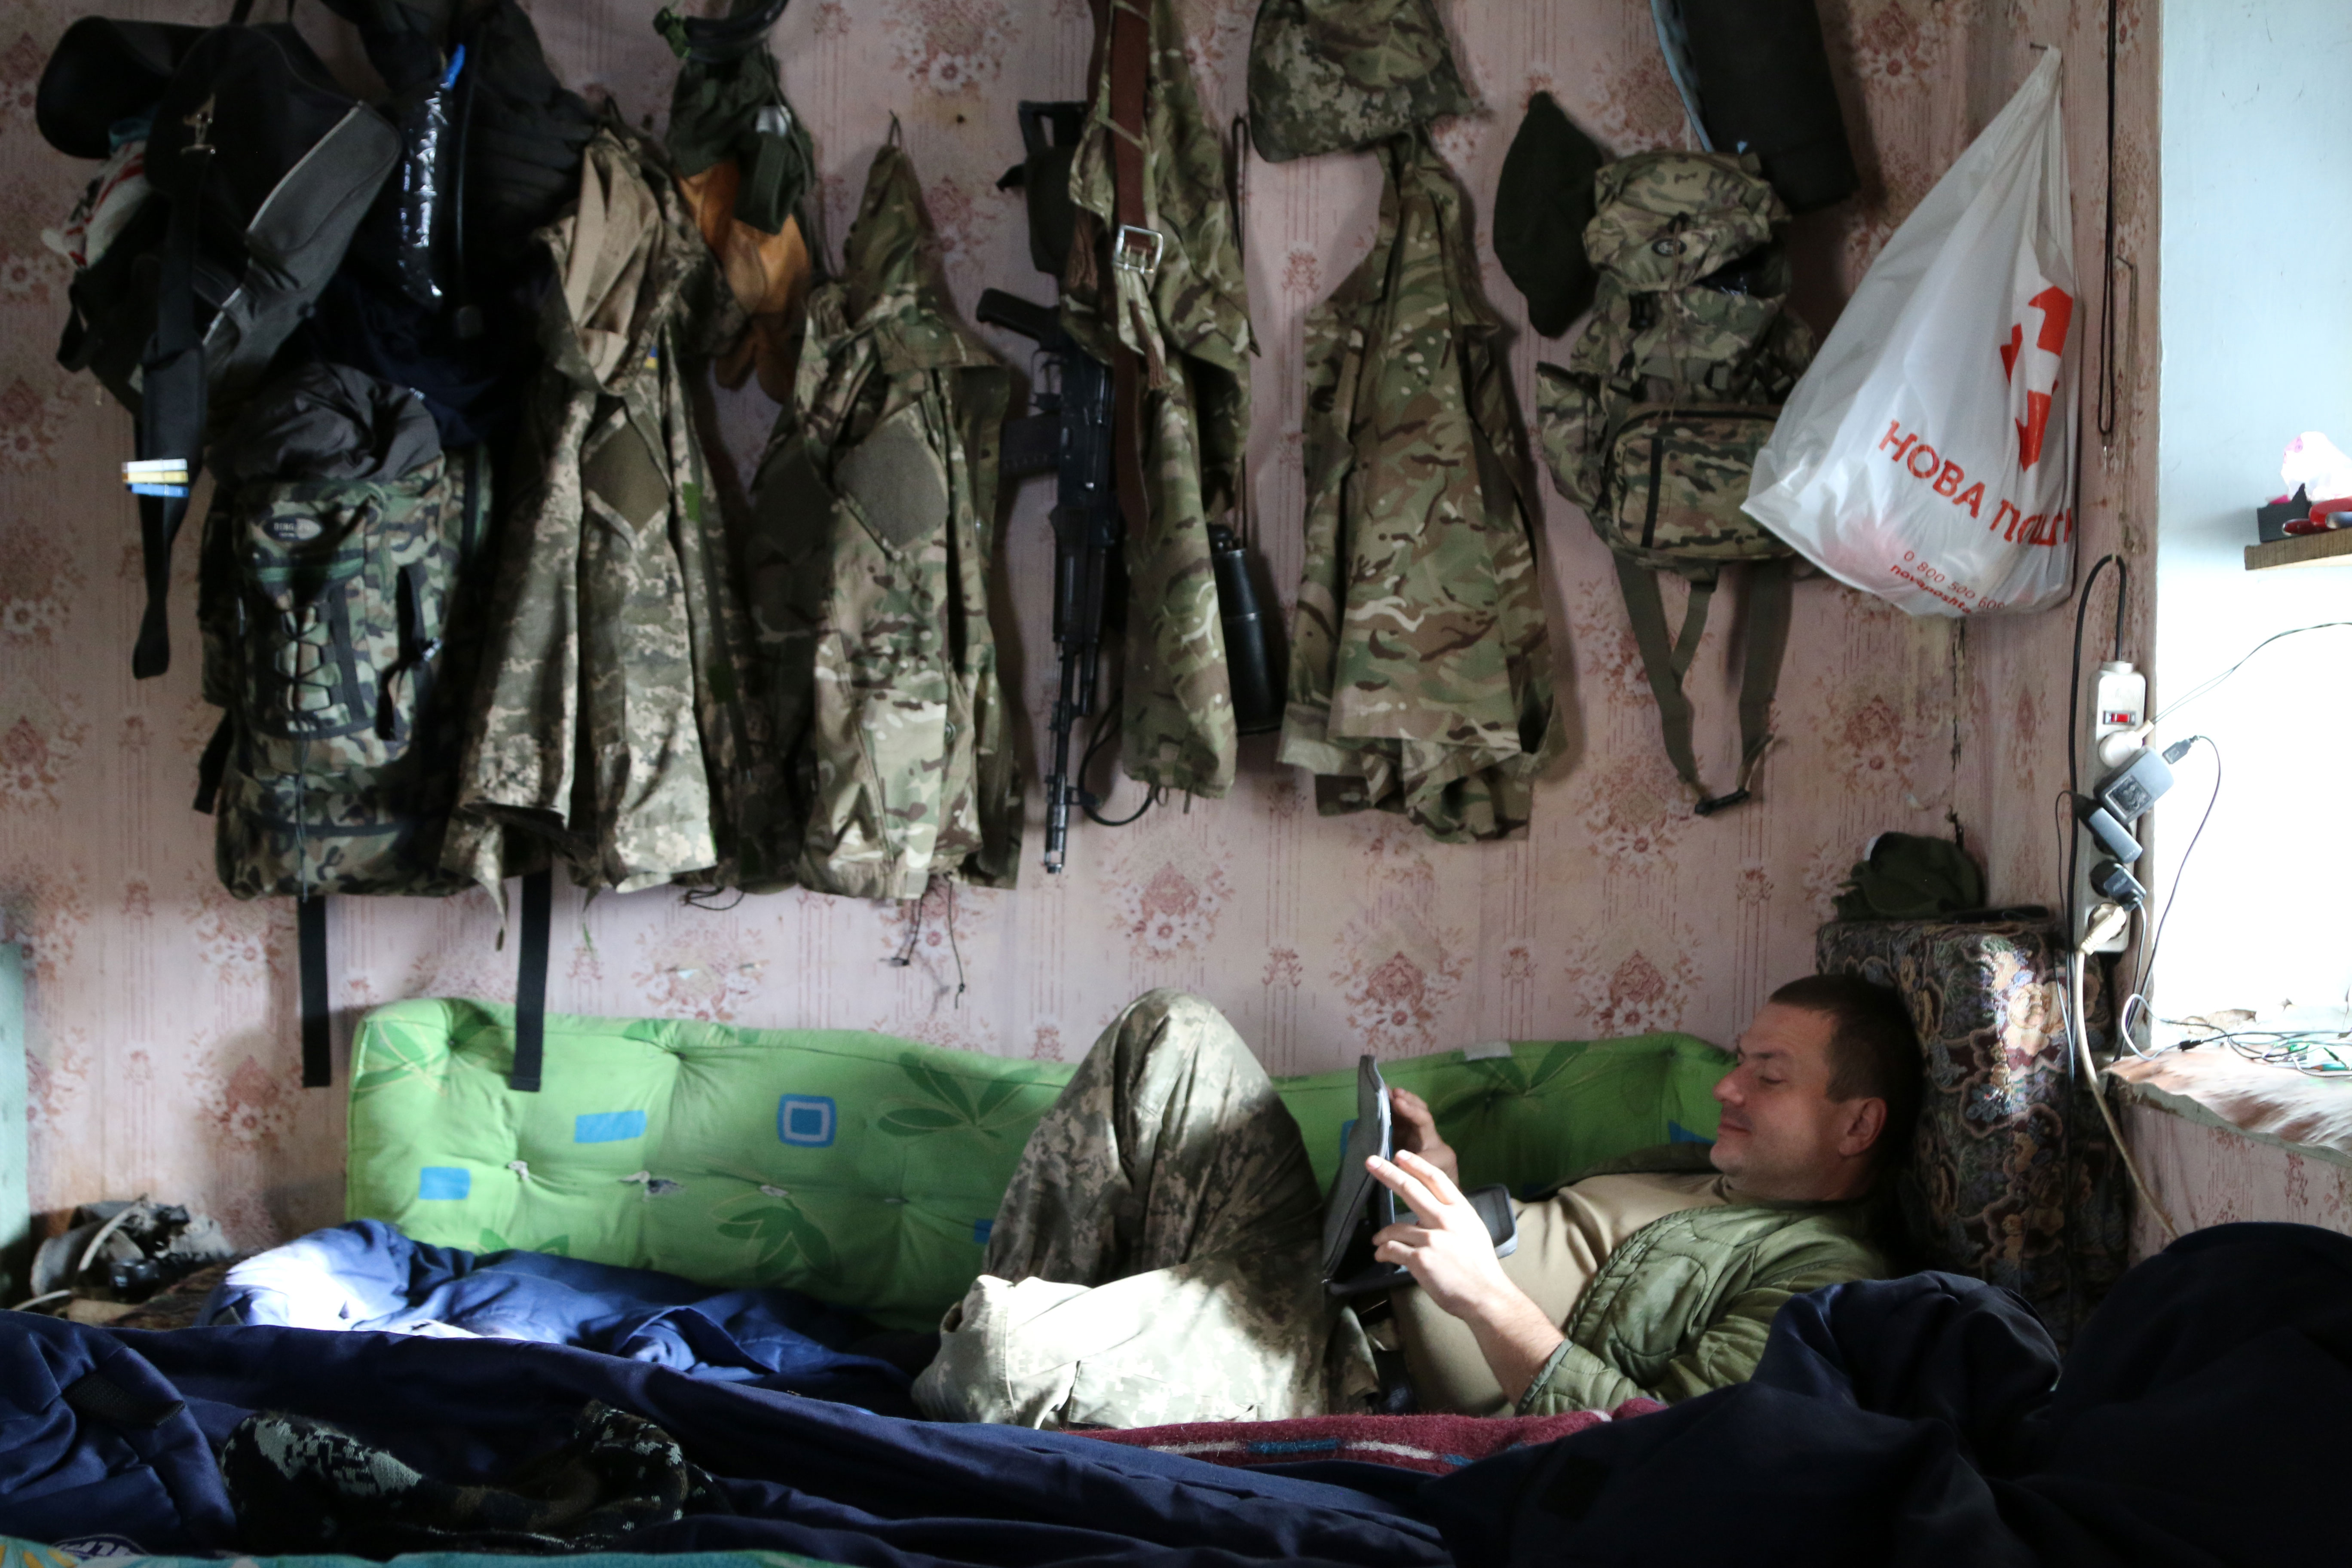 For many Ukrainian soldiers, war has become a way of life.